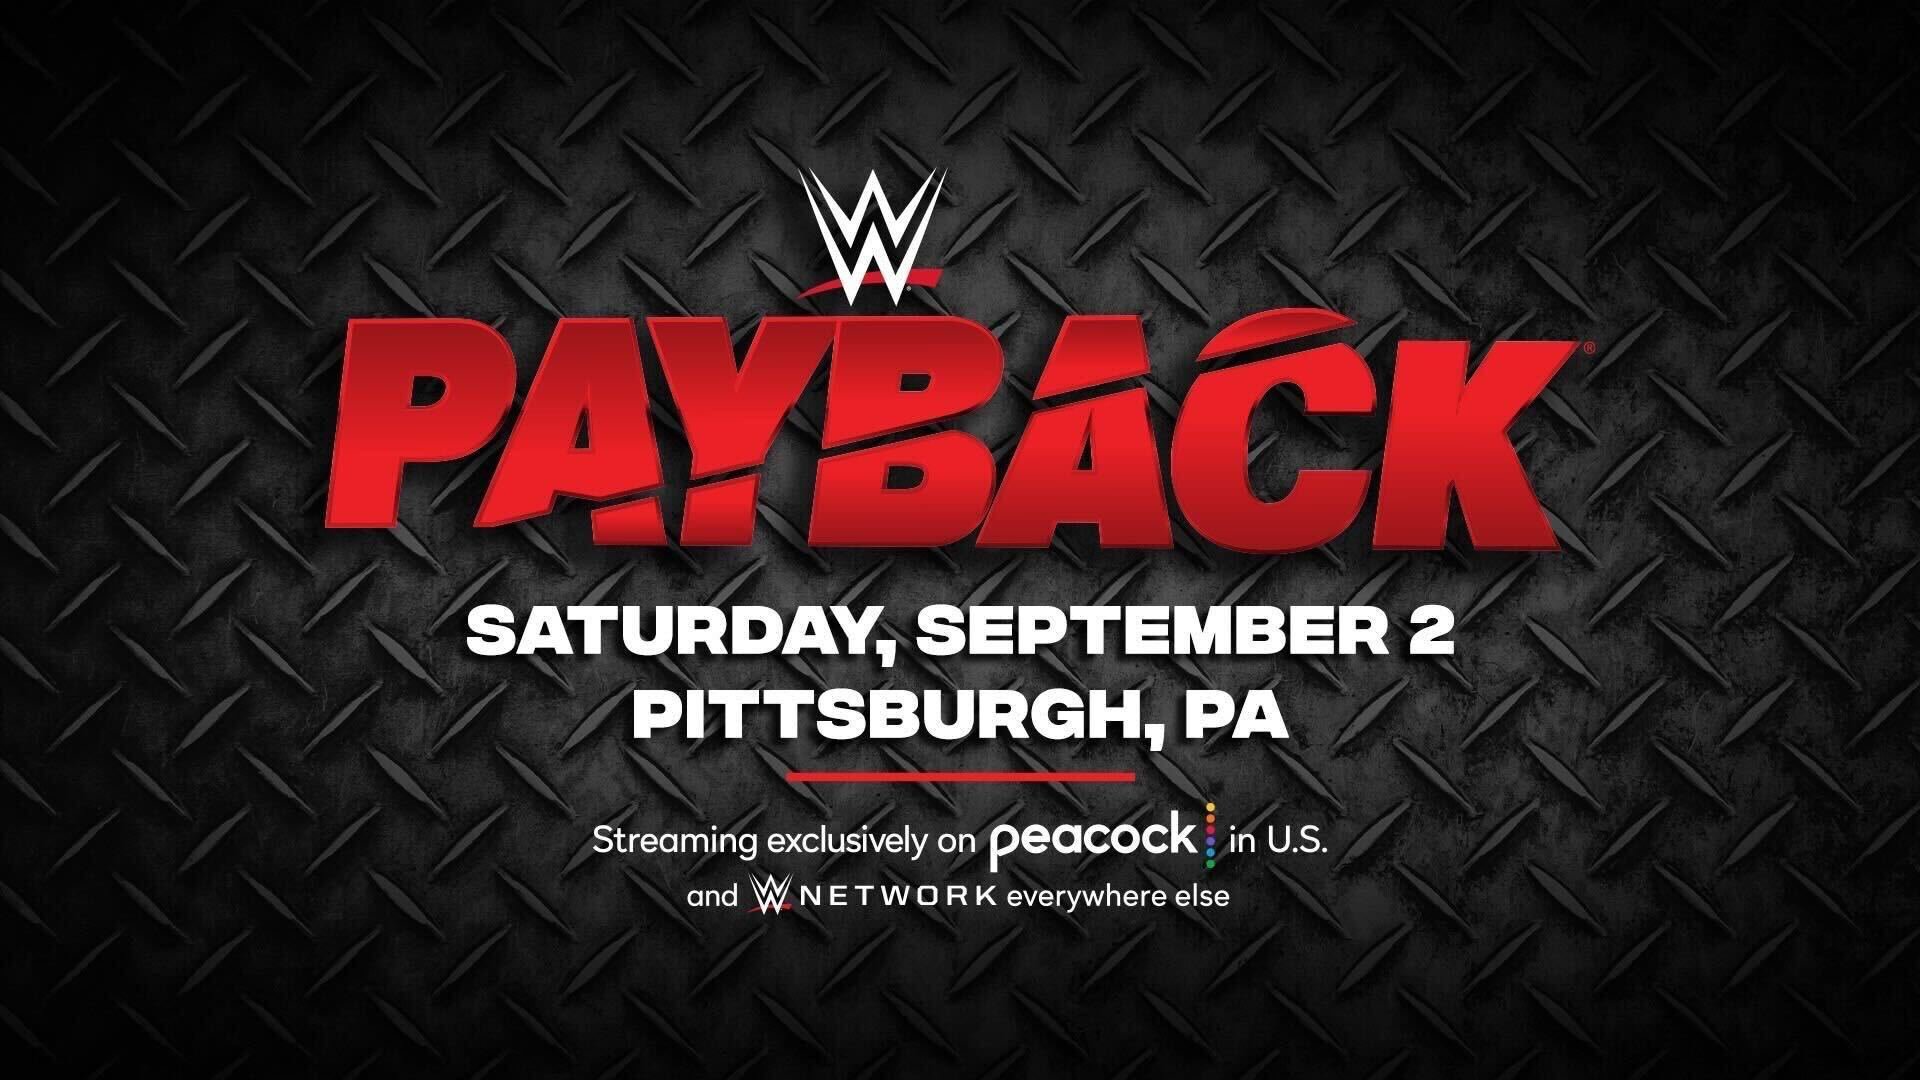 Pittsburgh to host WWE Payback on September 2 WWE